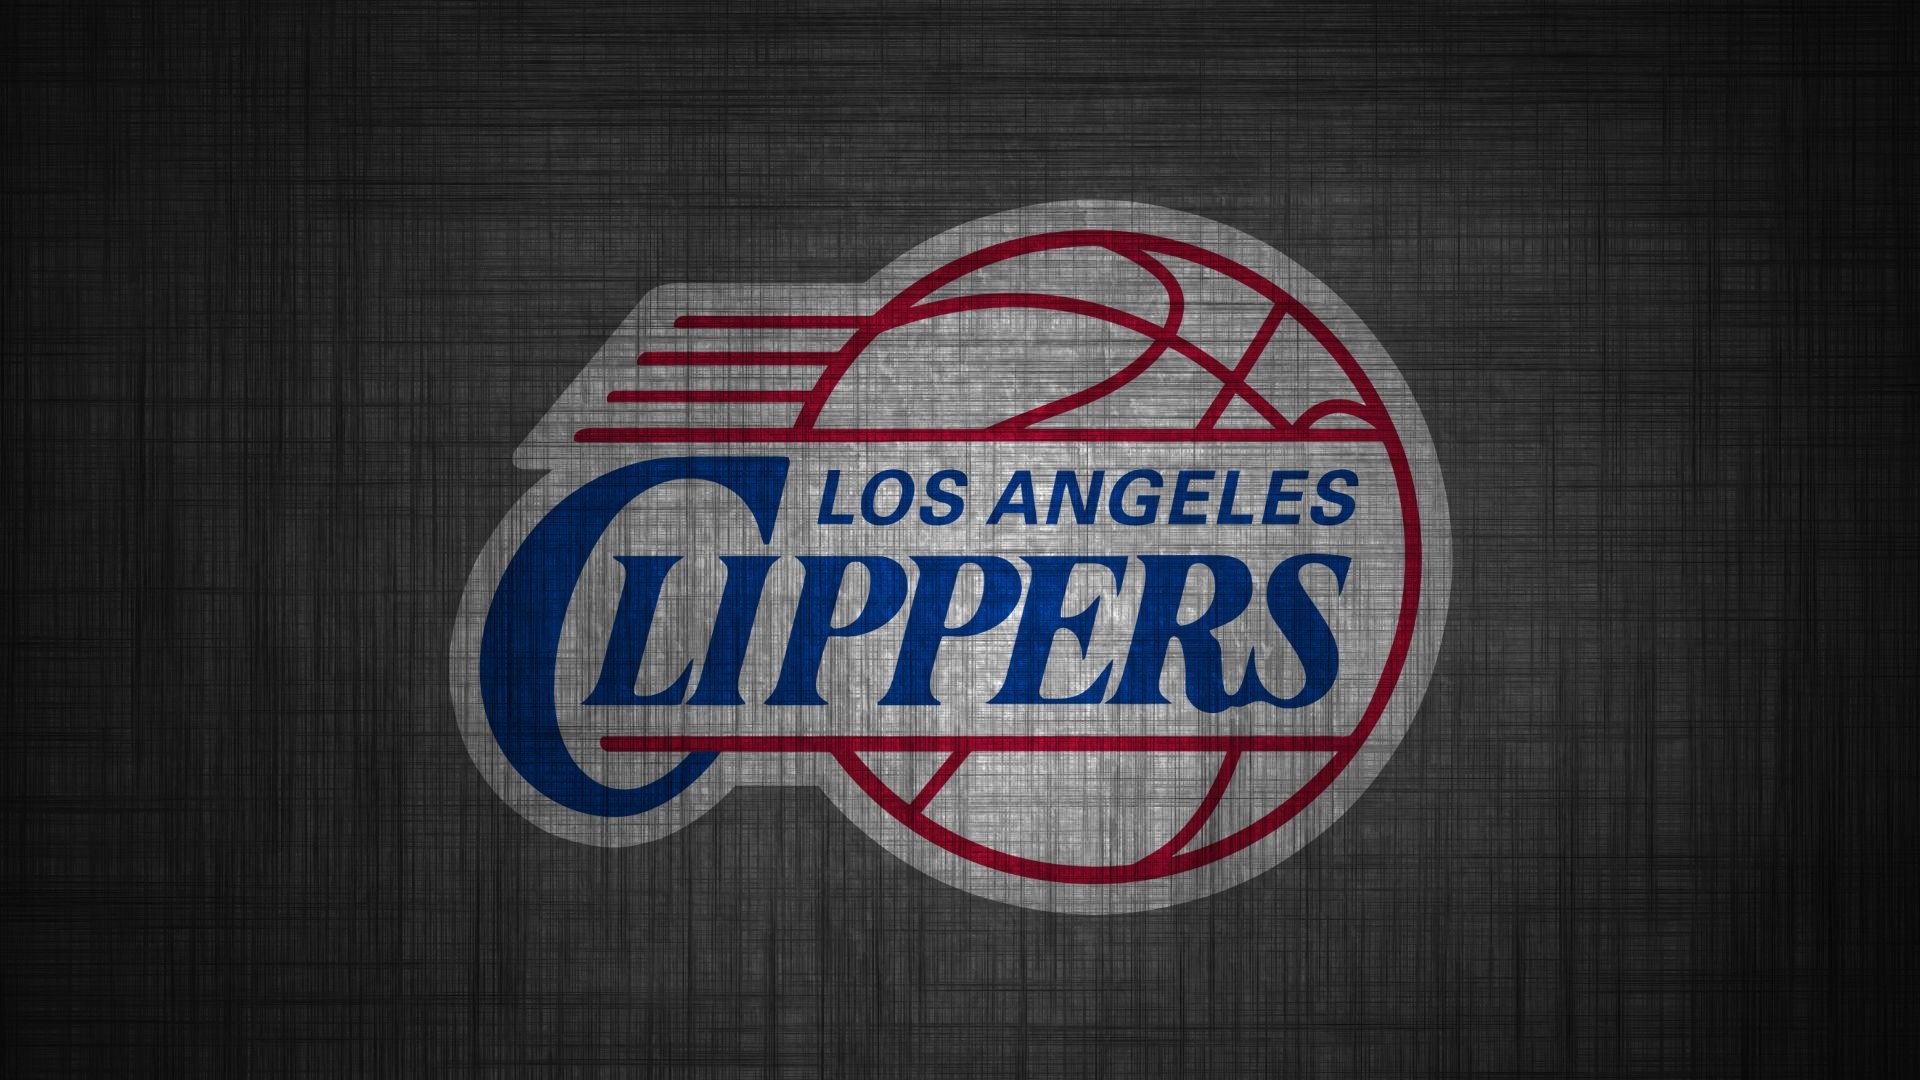 Los Angeles Clippers Free 897 1920x1080